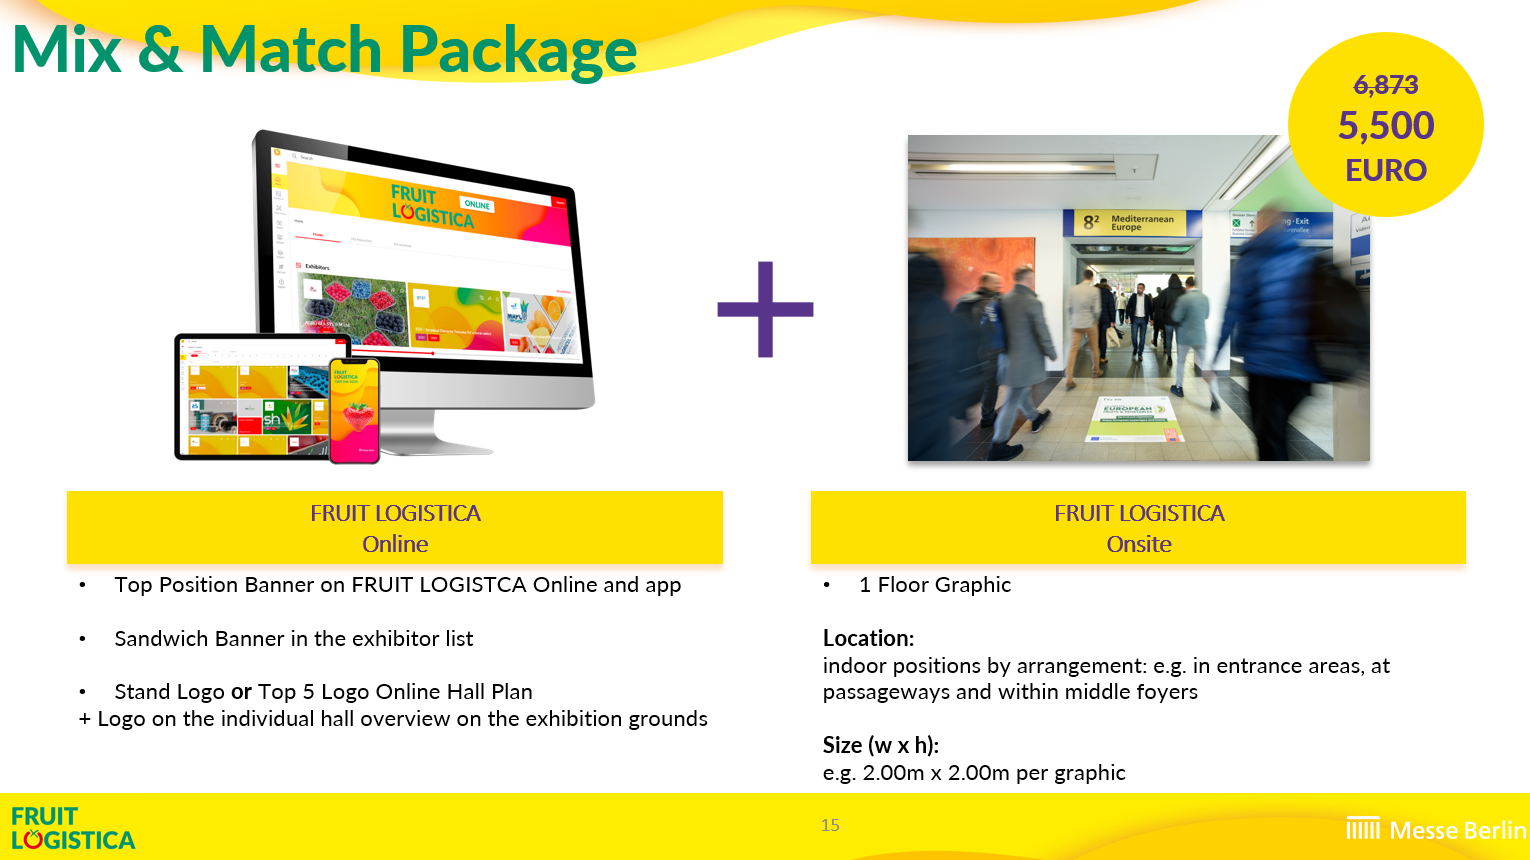 Mix & Match Package